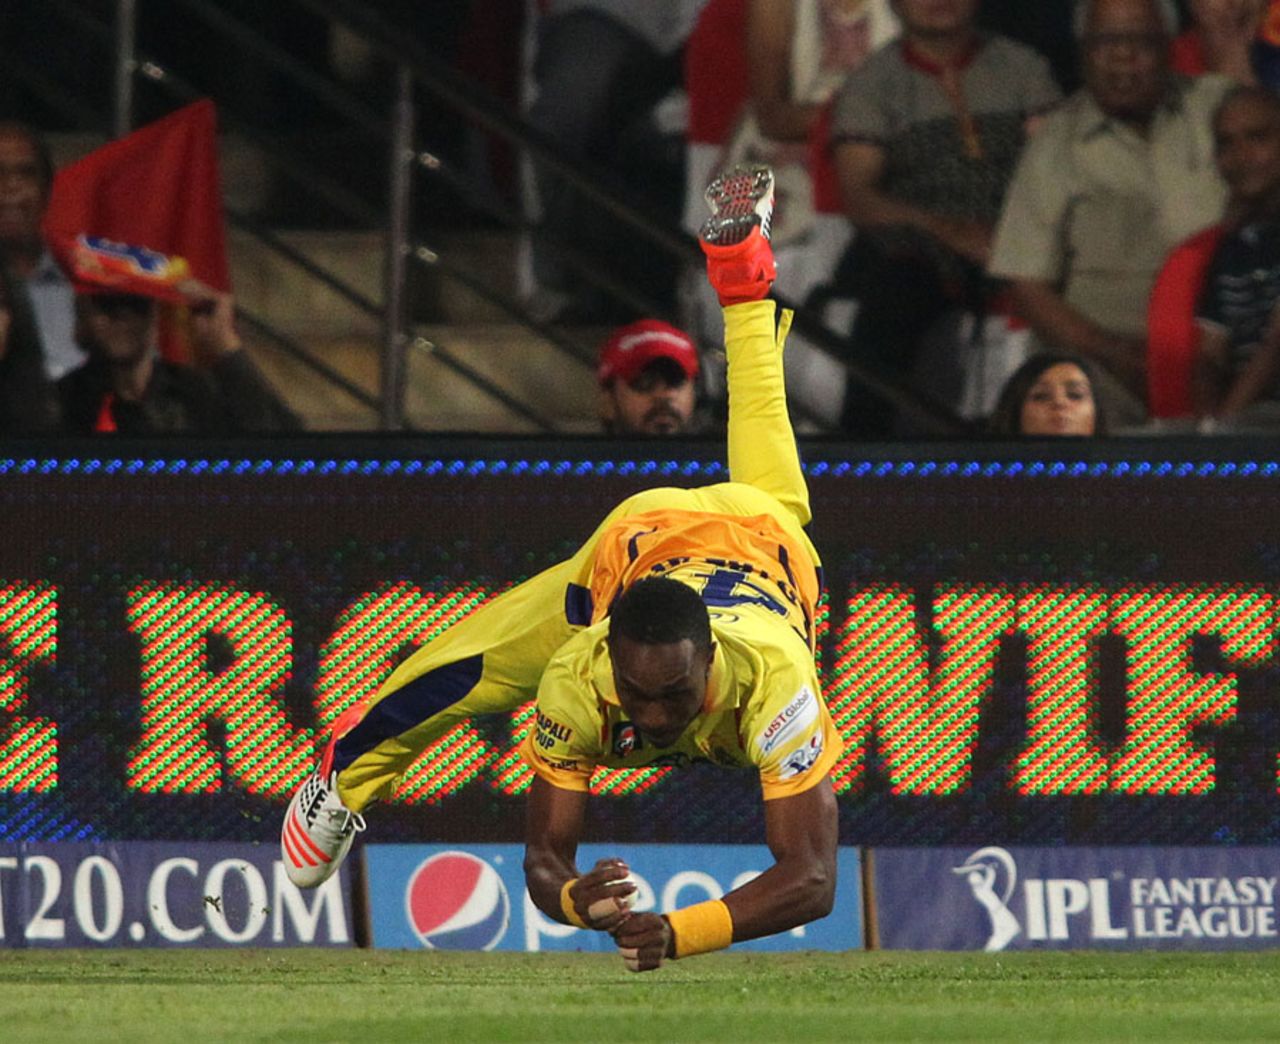 Dwayne Bravo rivaled Faf du Plessis with a stunning catch of his own, Royal Challengers Bangalore v Chennai Super Kings, IPL 2015, Bangalore, April 22, 2015